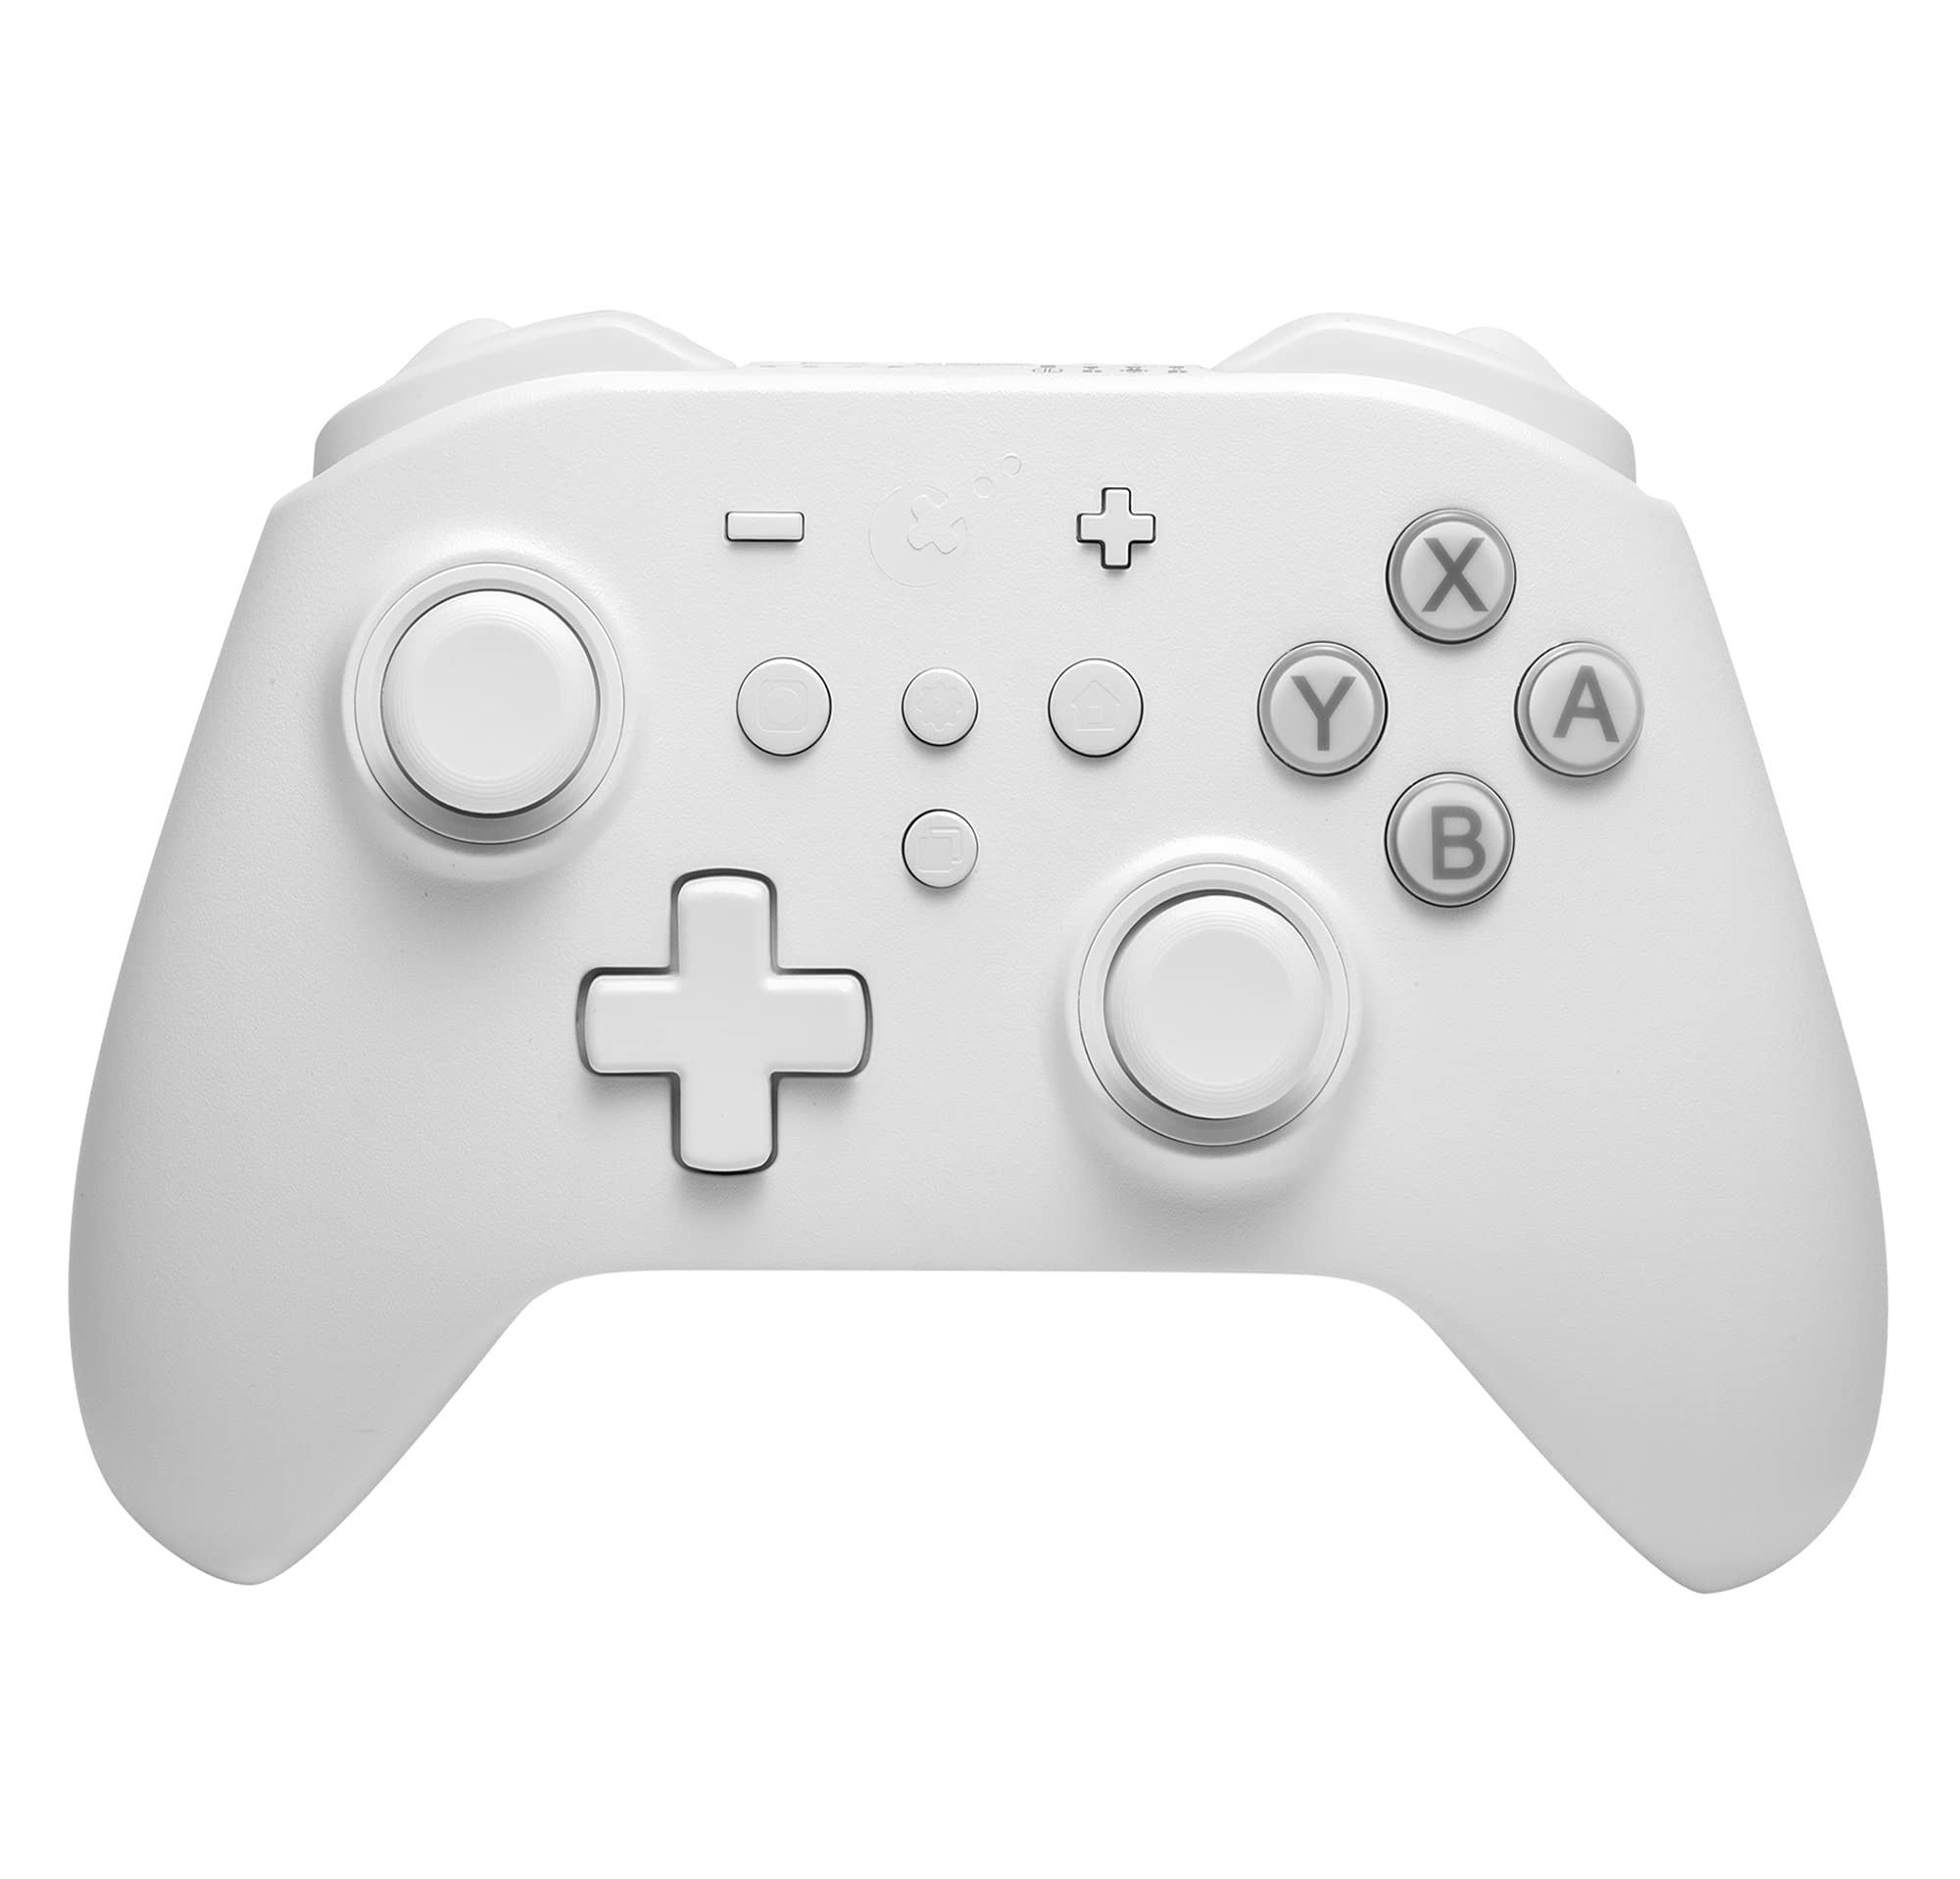 Tinbinx (No Stick Drift) KingKong2 Pro Wireless Controller for Switch, Compatible with Switch/Switch Lite/Switch OLED/PC/Android/Mac/IOS, Motion Control/NFC (white)